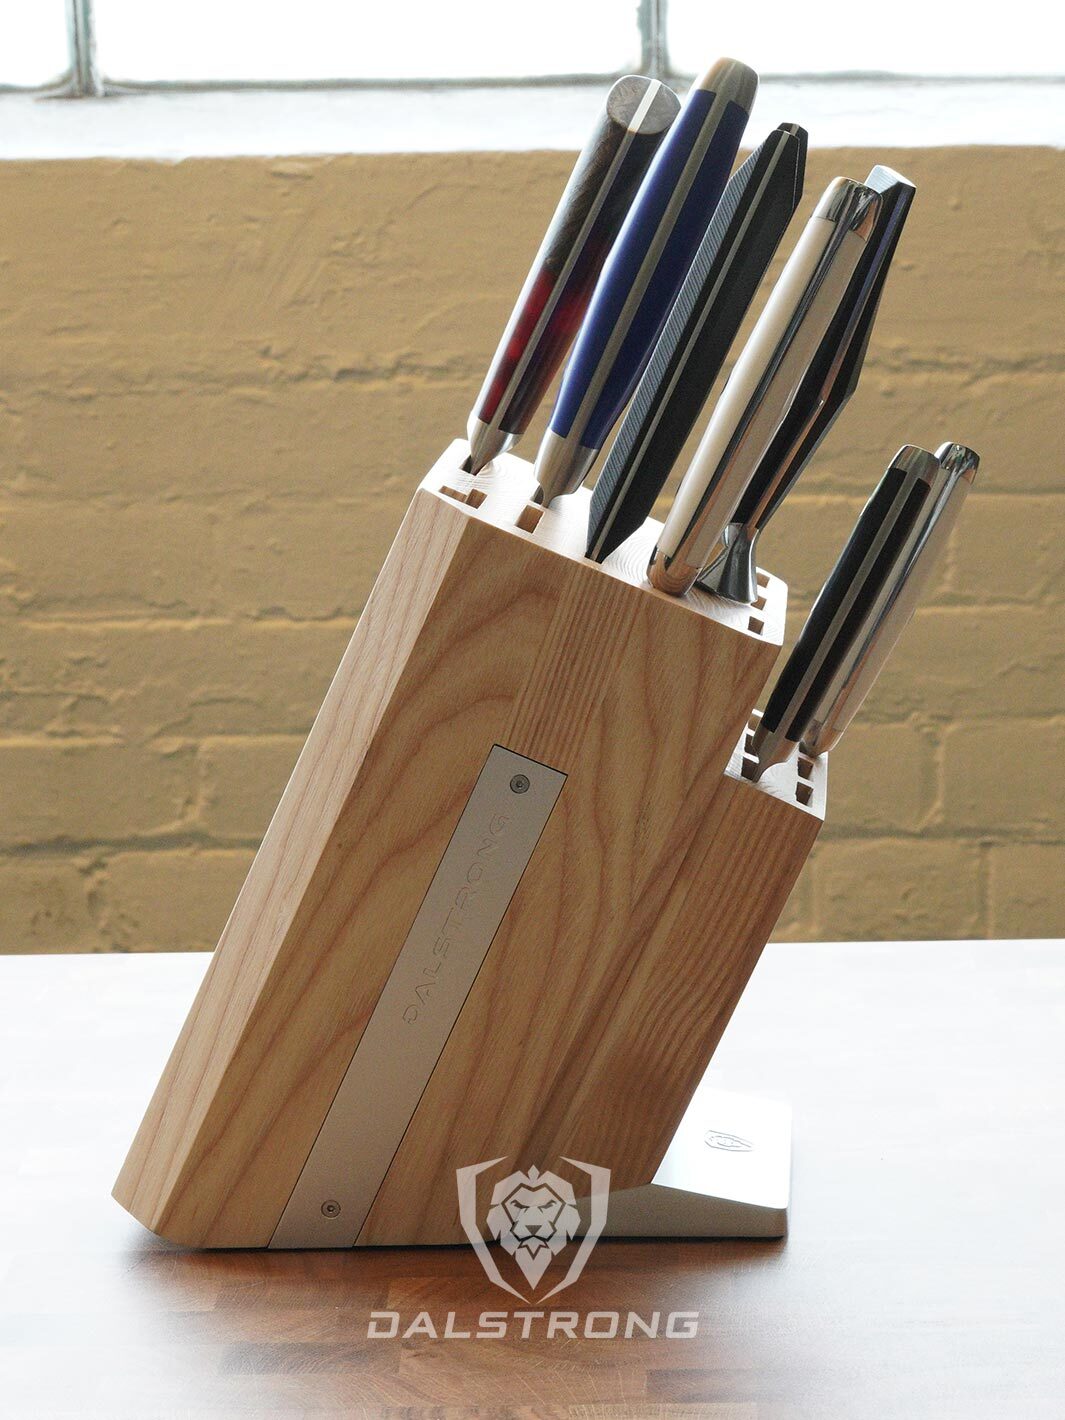 Dalstrong 18 slots universal knife block featuring it's wooden block with seven knives inside.